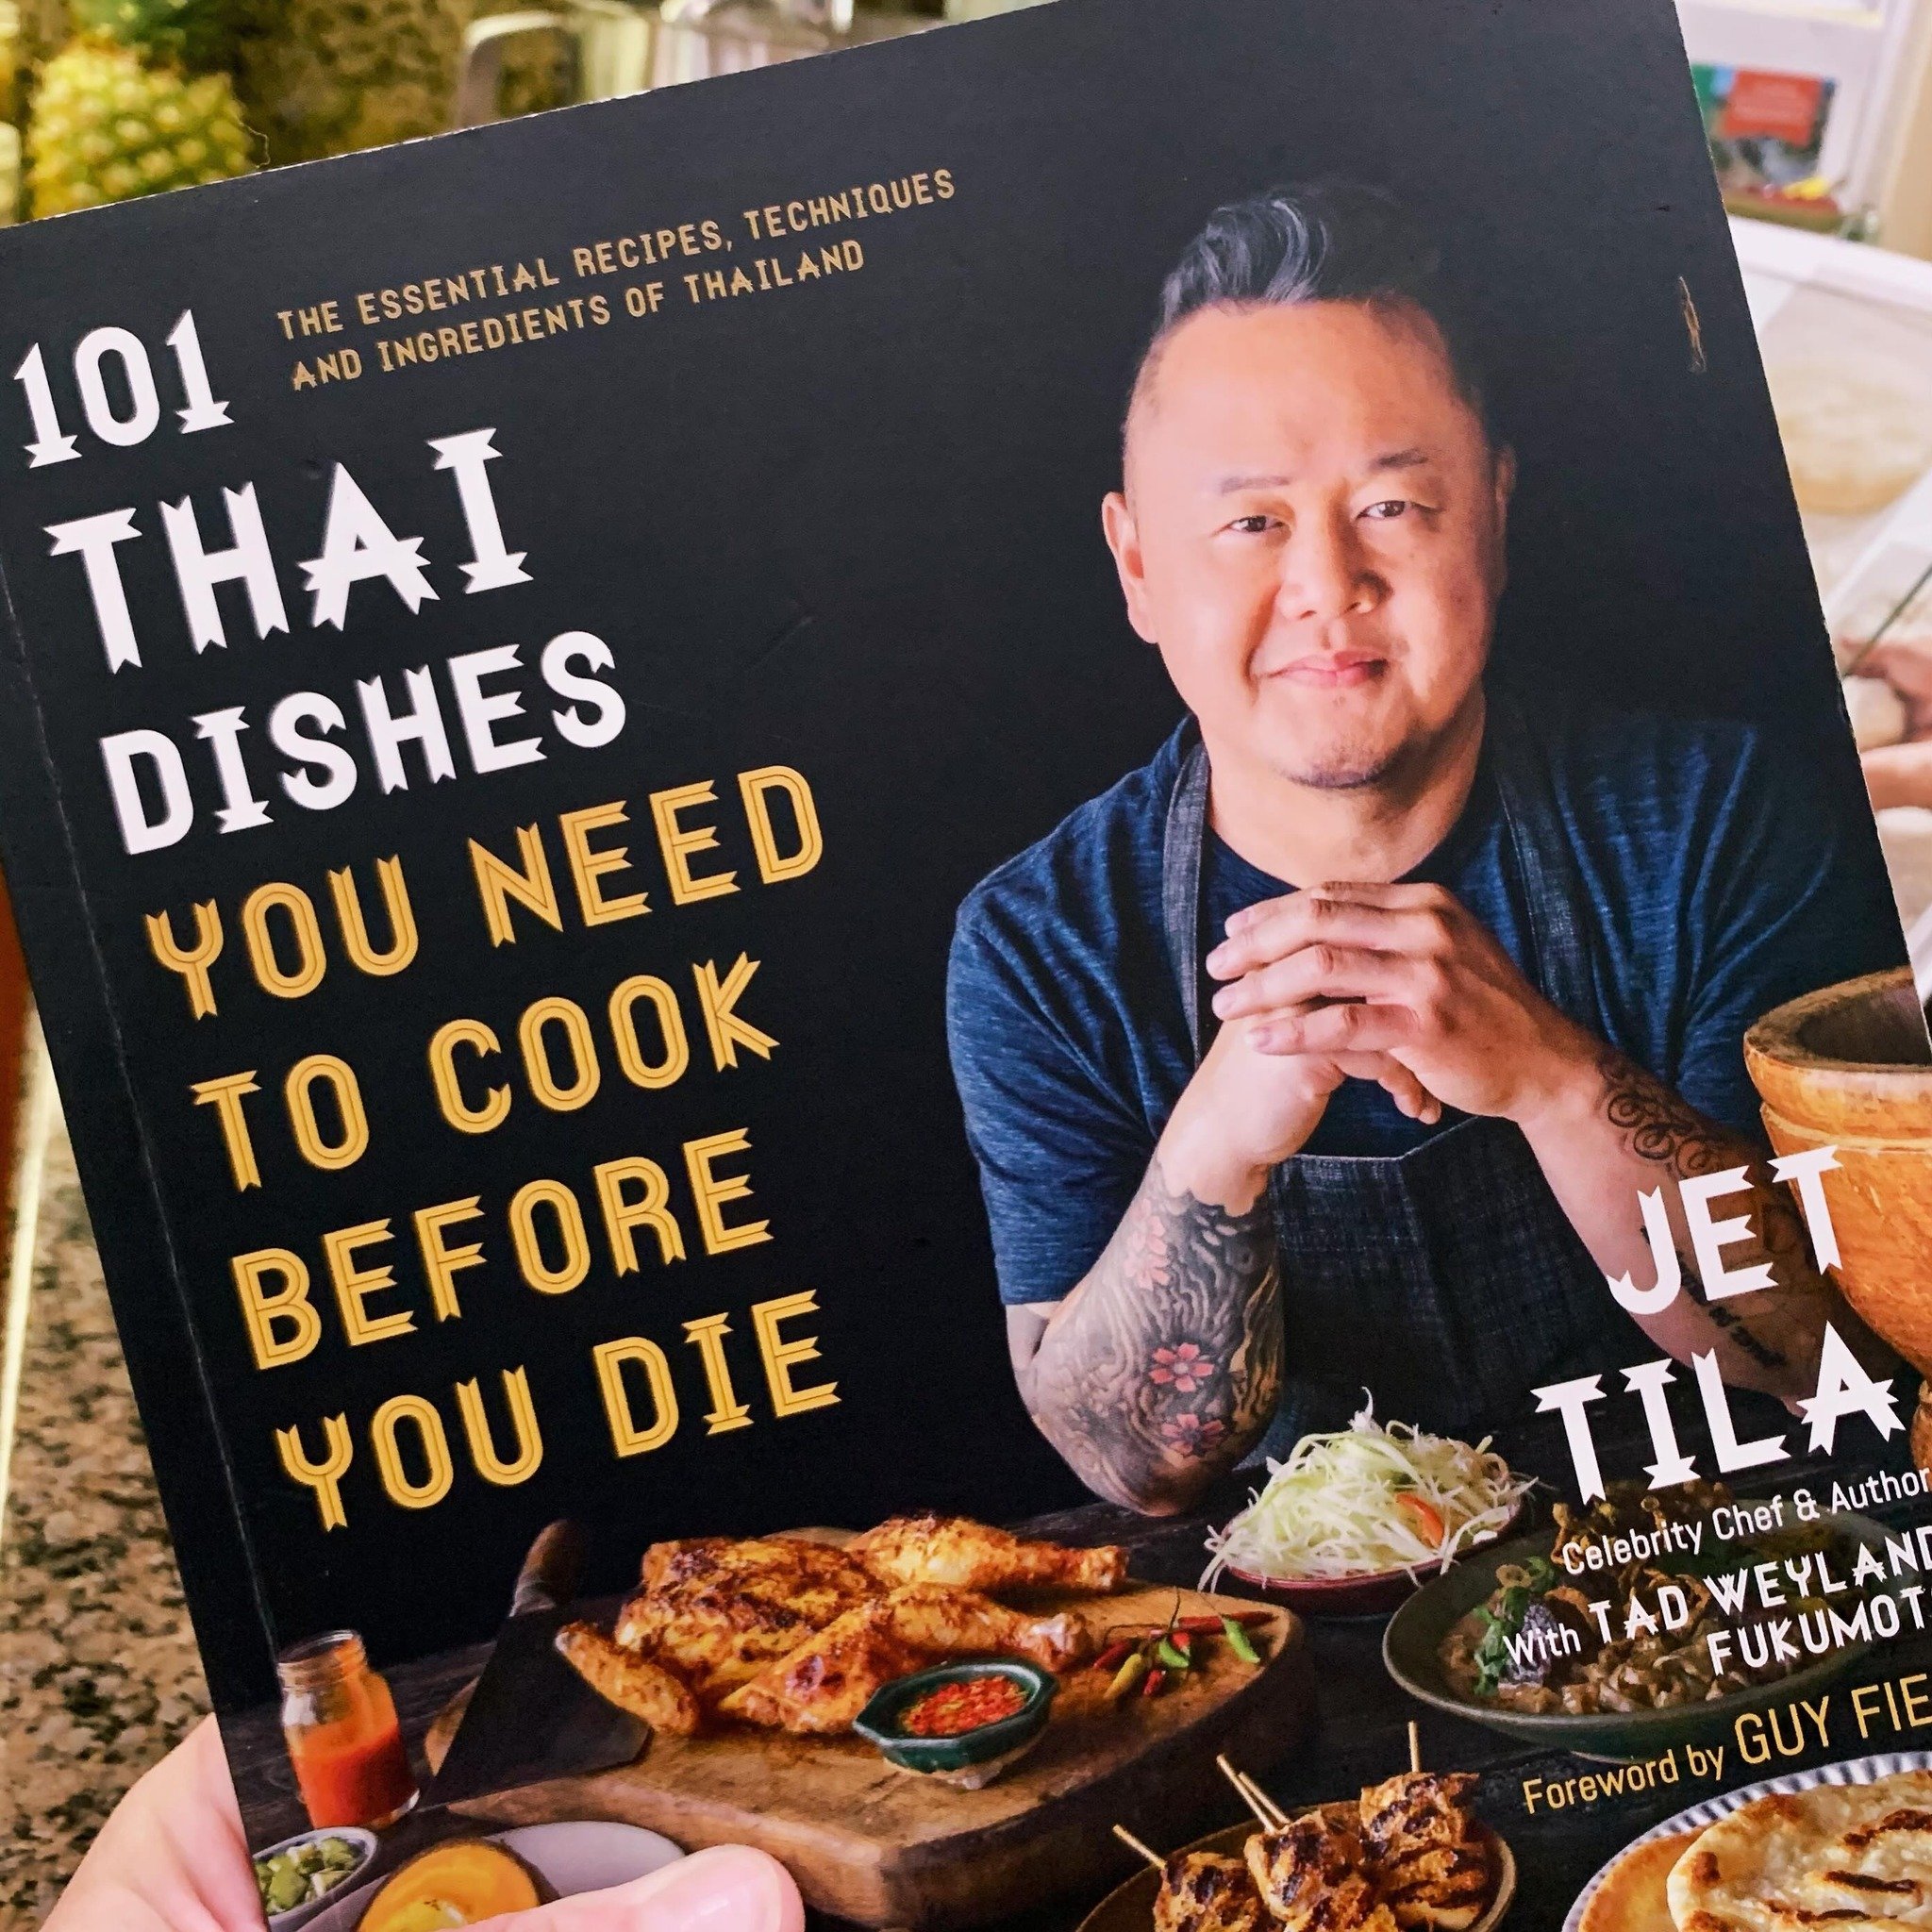 Weekend adventures&hellip; can&rsquo;t wait!

🌶️🥥🍍🥦🧄🧅🥒🫚🍤🥭🍋&zwj;🟩🍵

#homemade #thairecipes @jettila